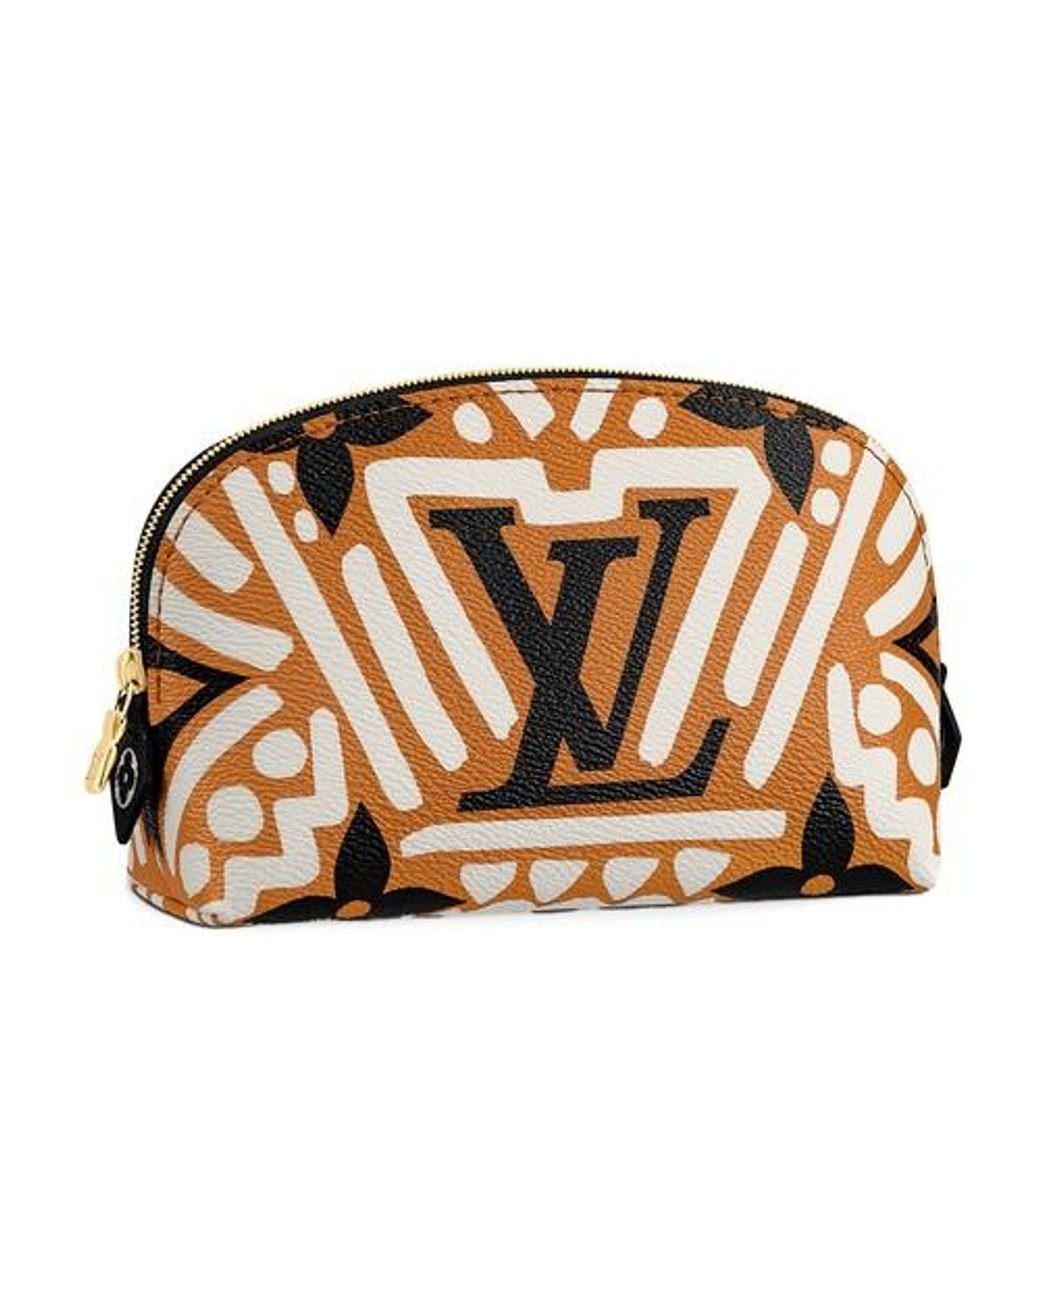 Louis Vuitton Cosmetic Pouch PM in Monogram - SOLD